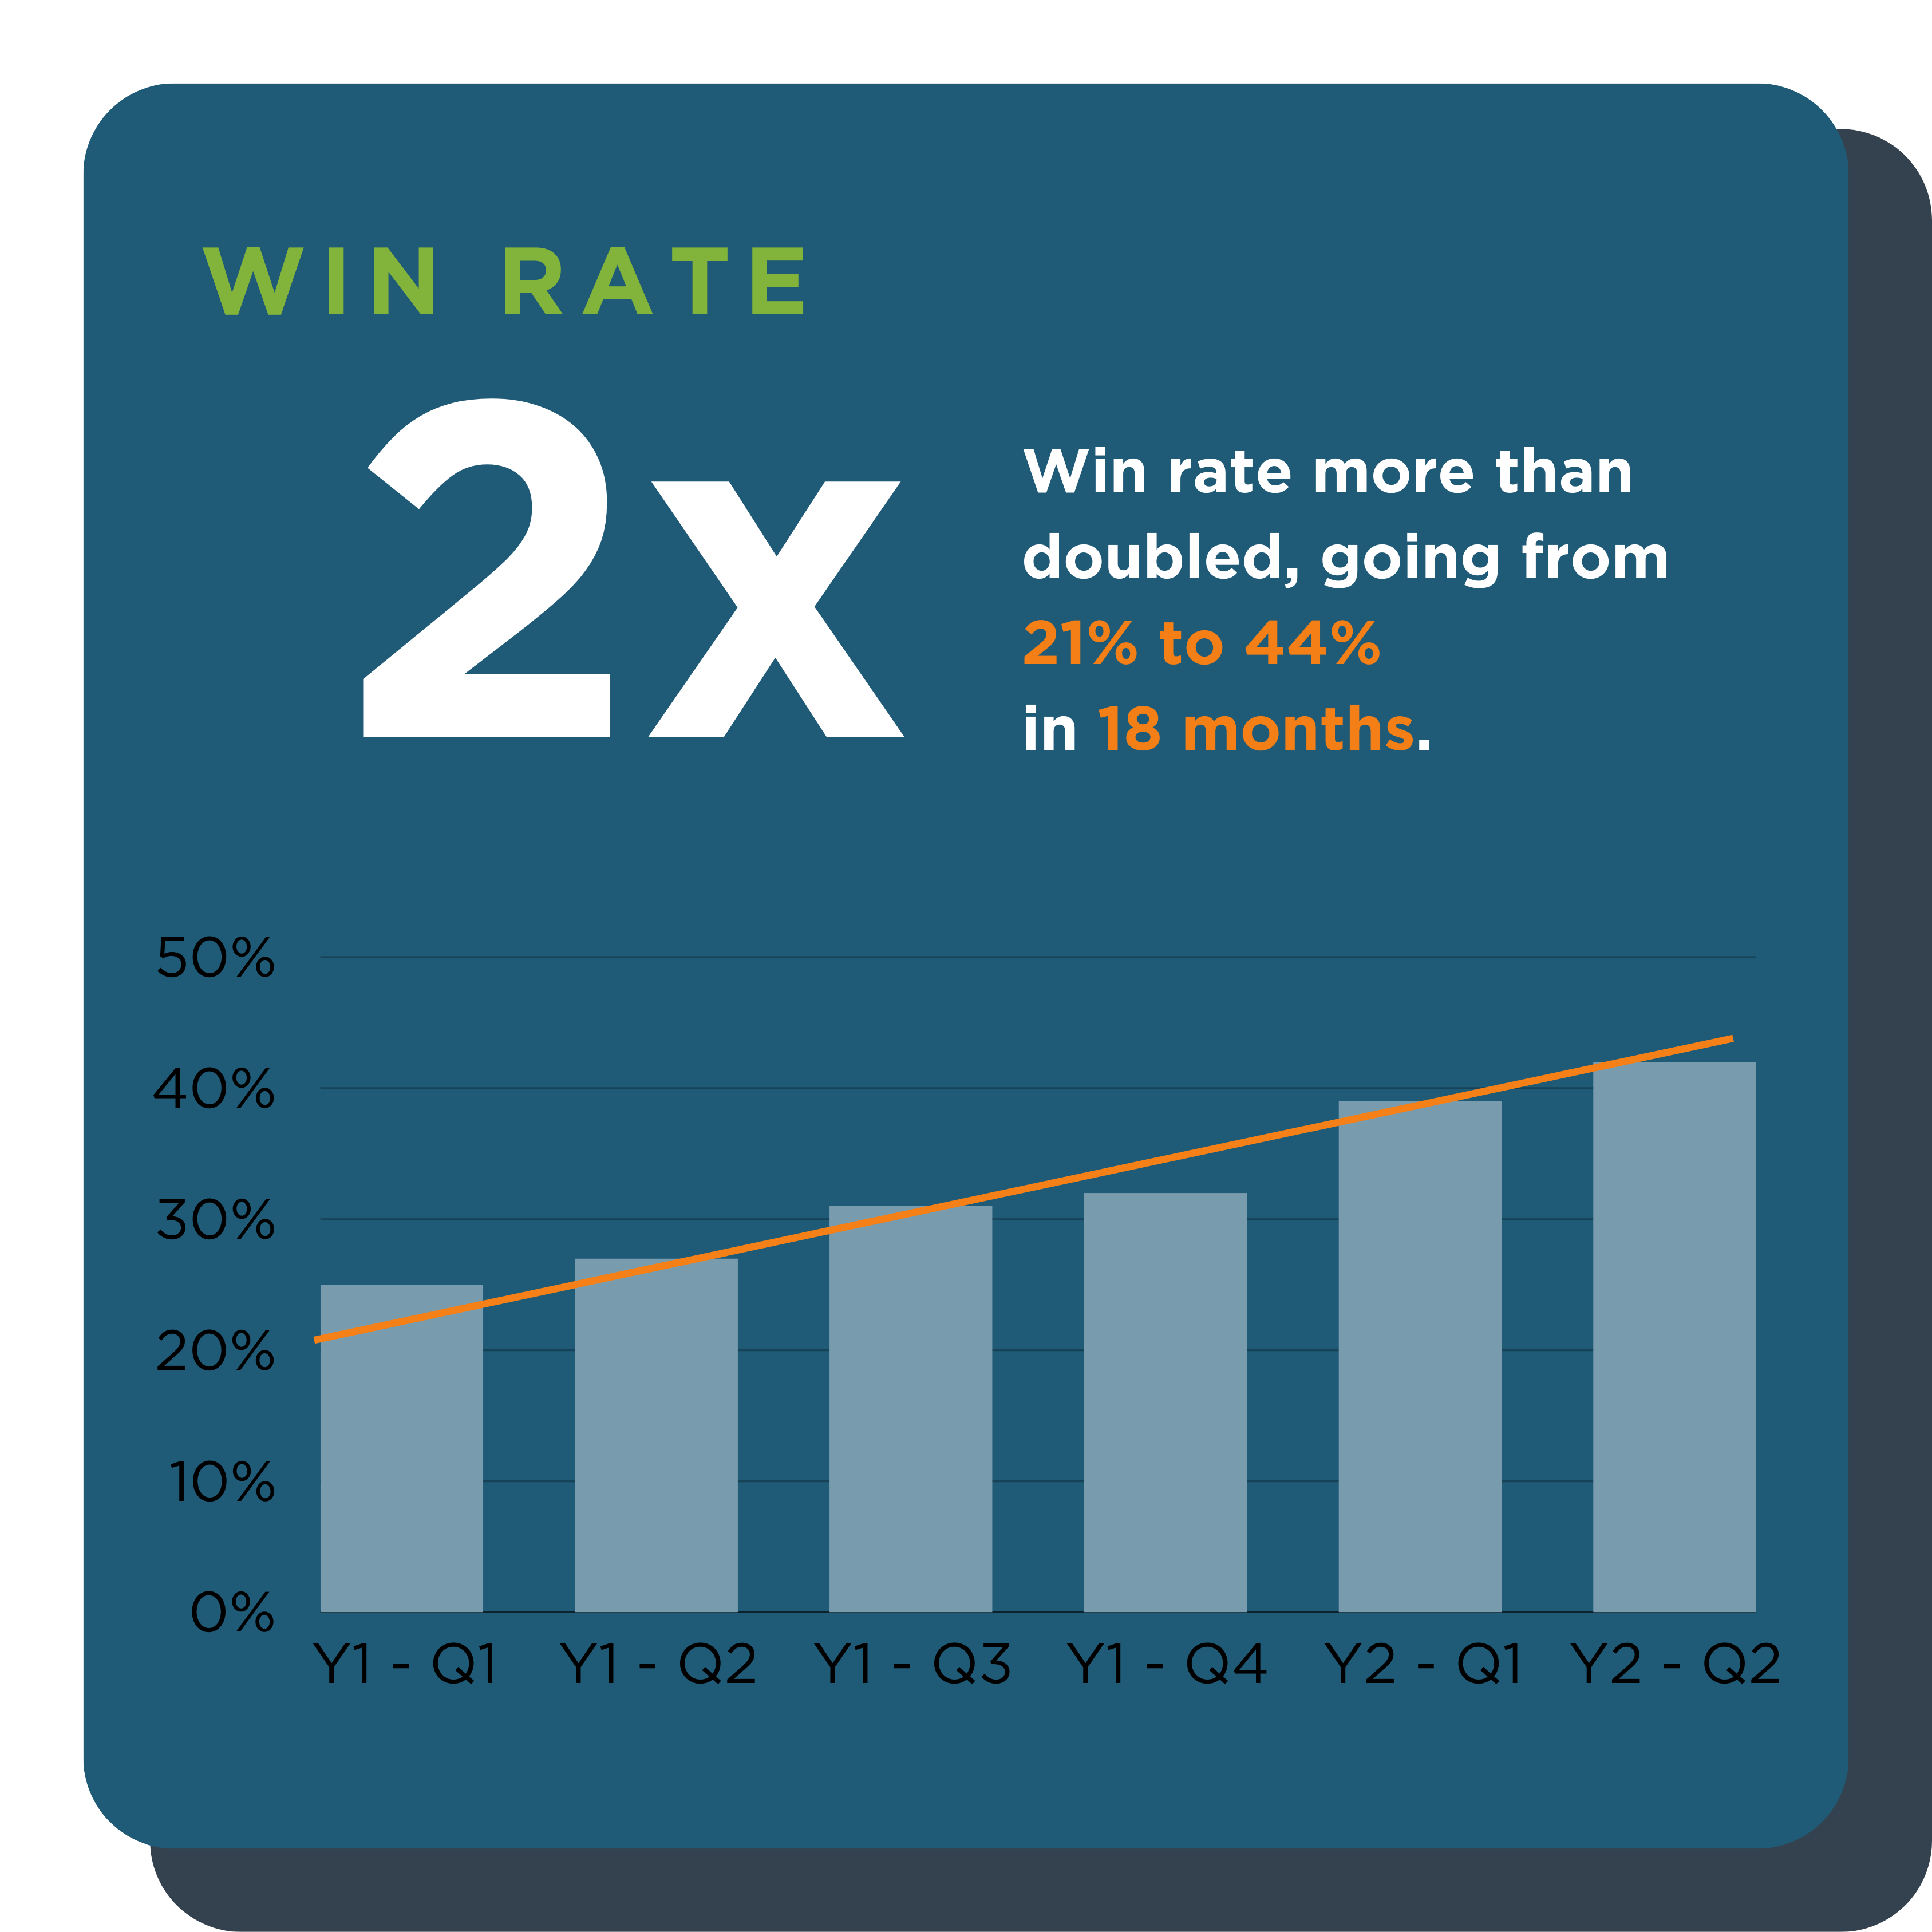 Win rate increases from 21% to 44% in 18 months.